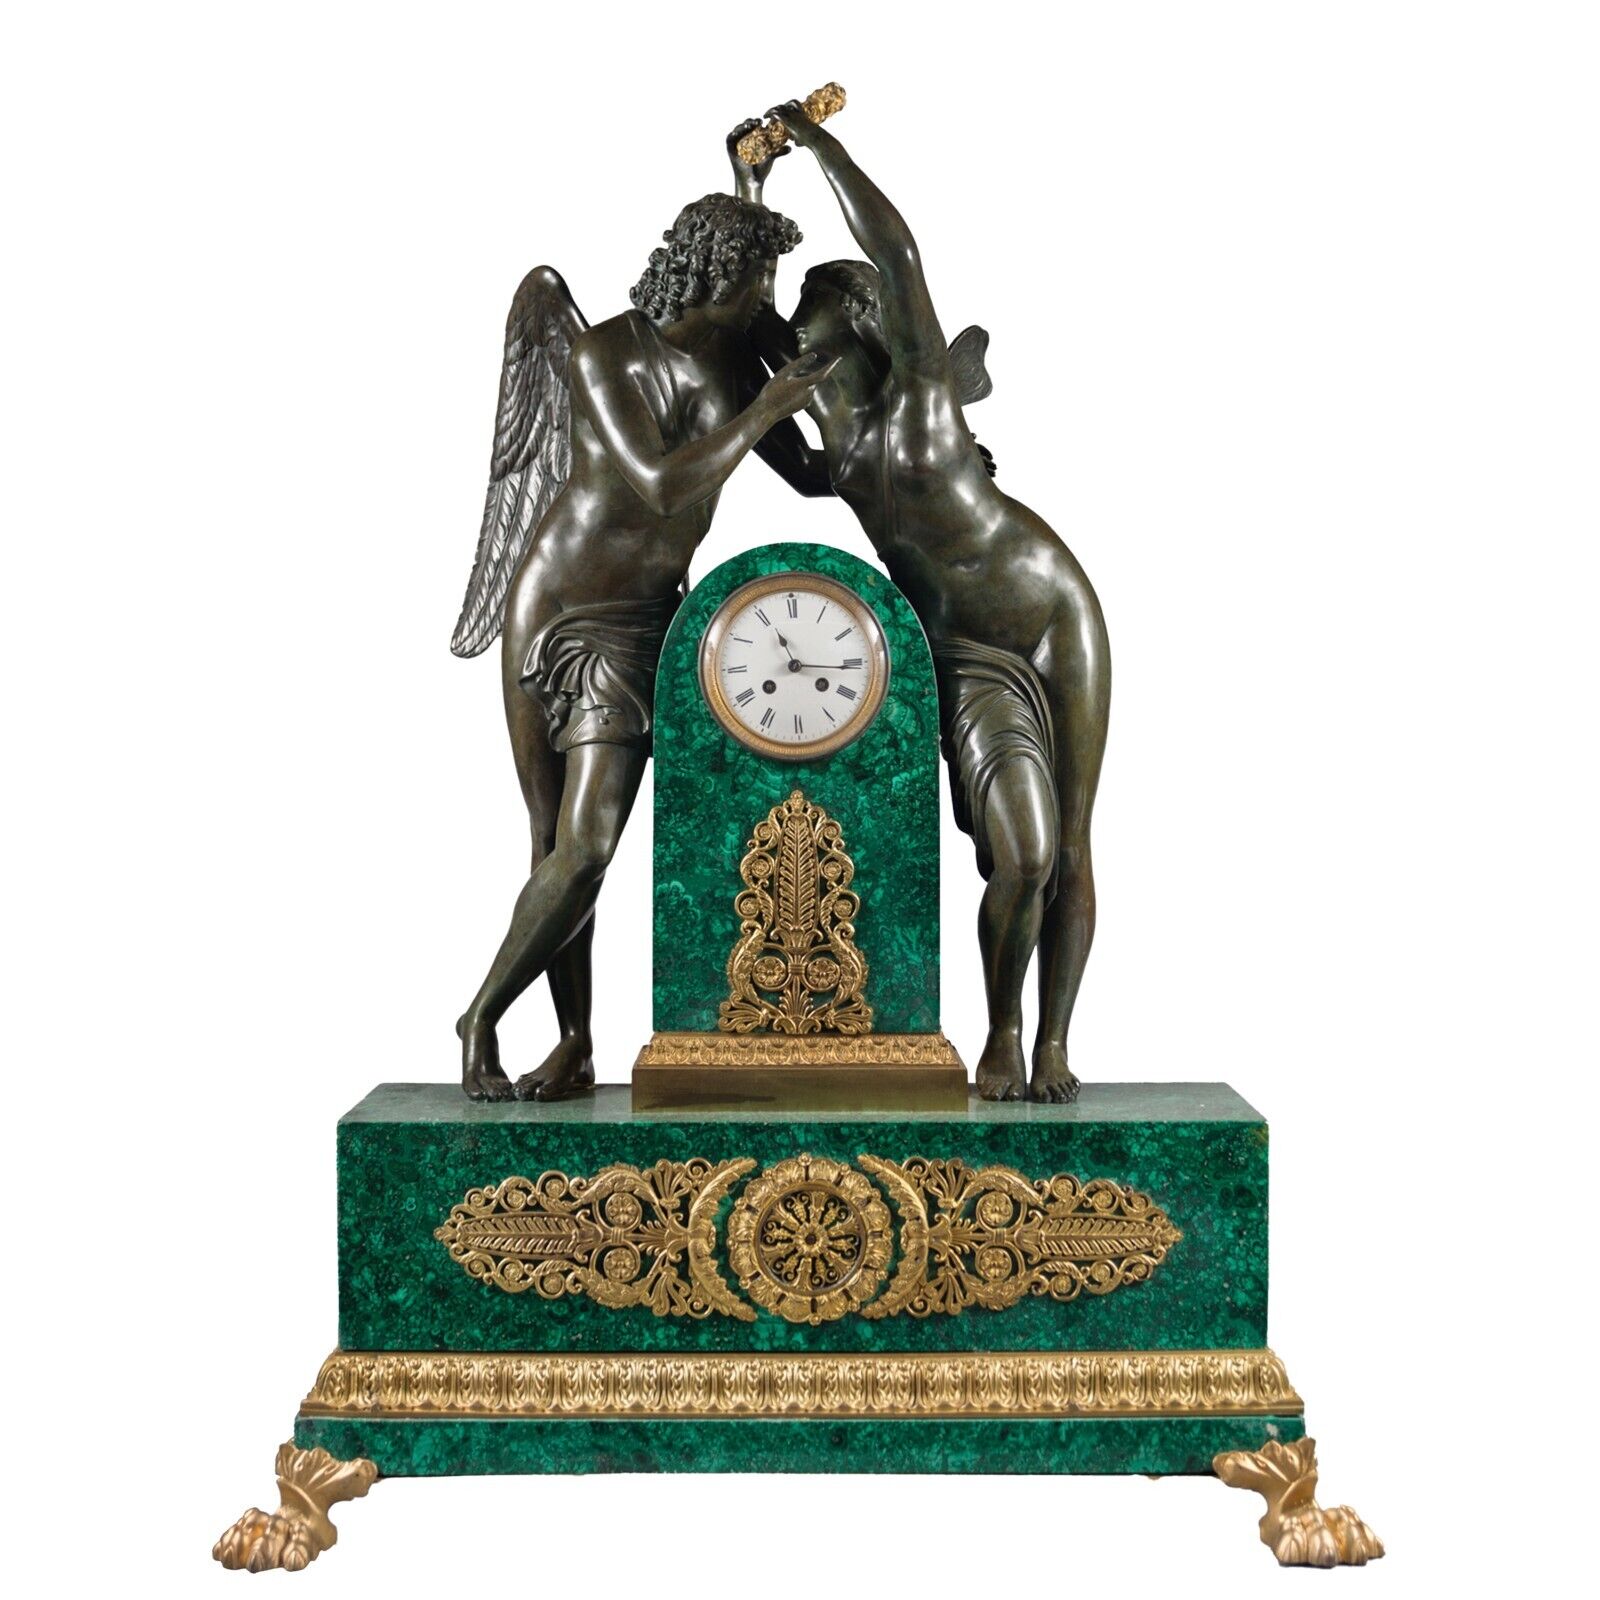 A PALATIAL ANTIQUE FRENCH BRONZE & MALACHITE MANTEL CLOCK OF CUPID AND PSYCHE